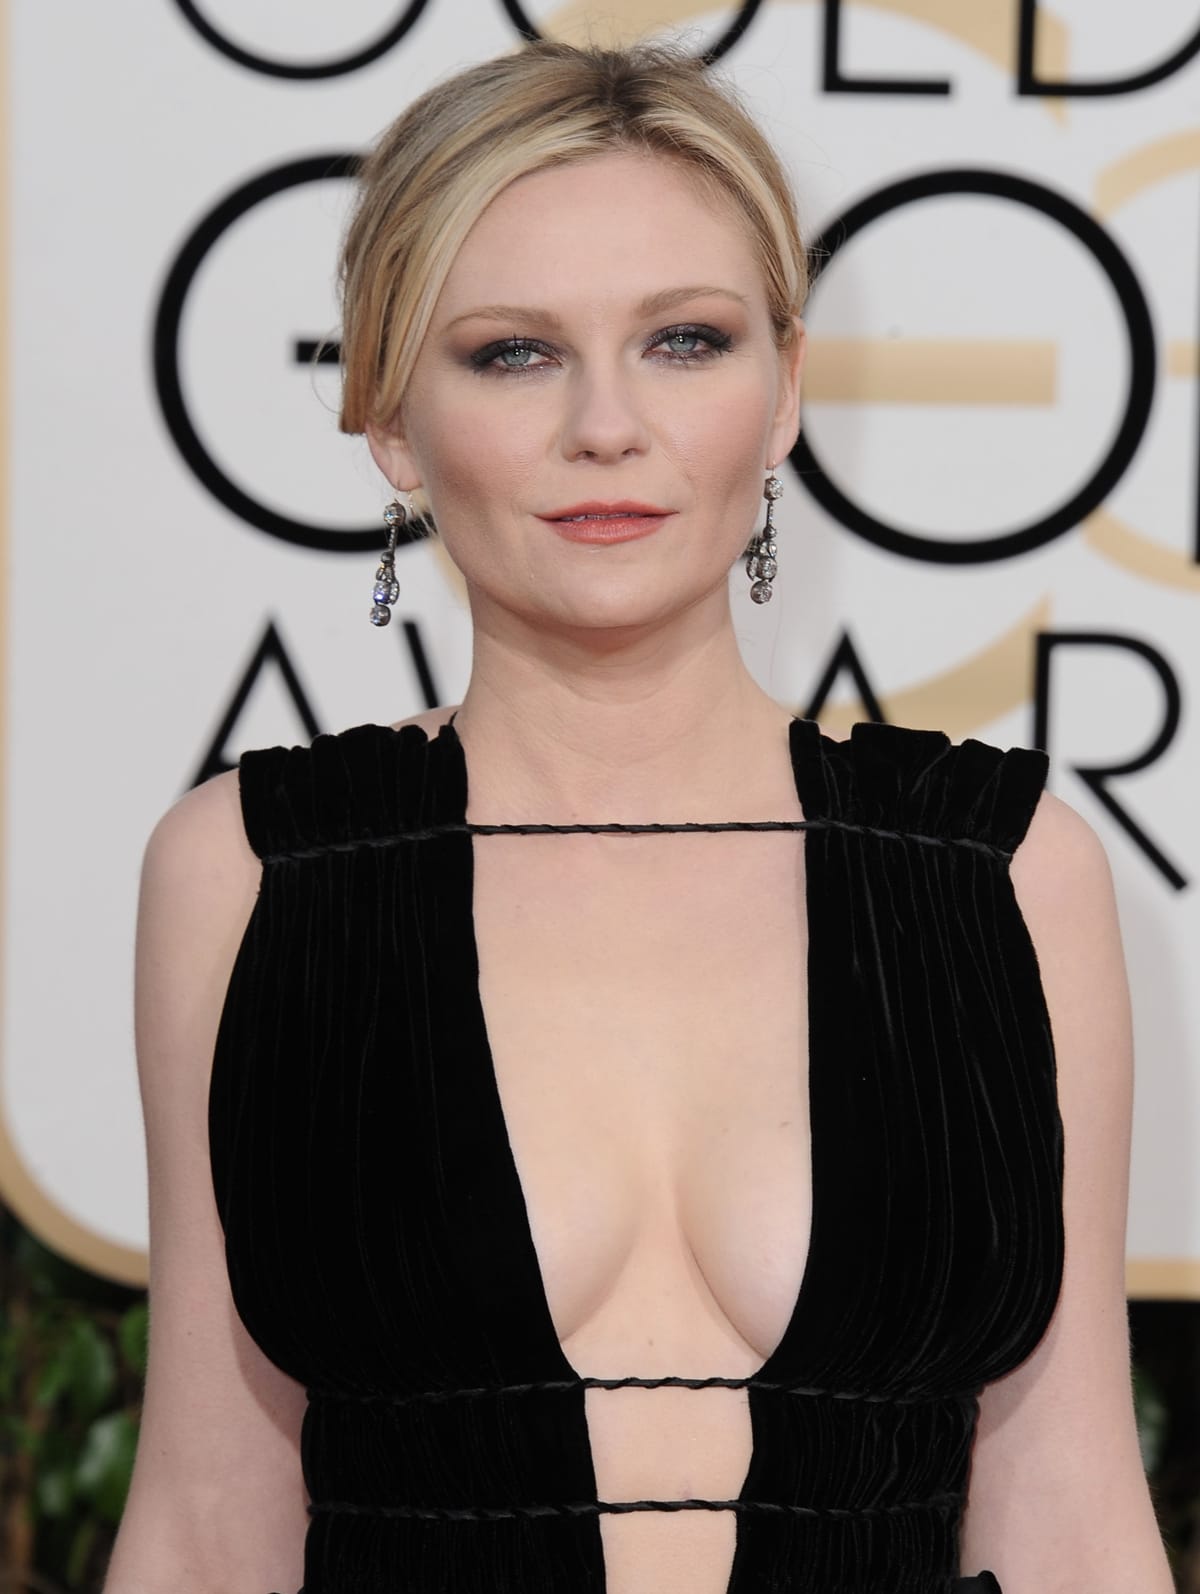 Kirsten Dunst says it's harder to dress when you have big boobs